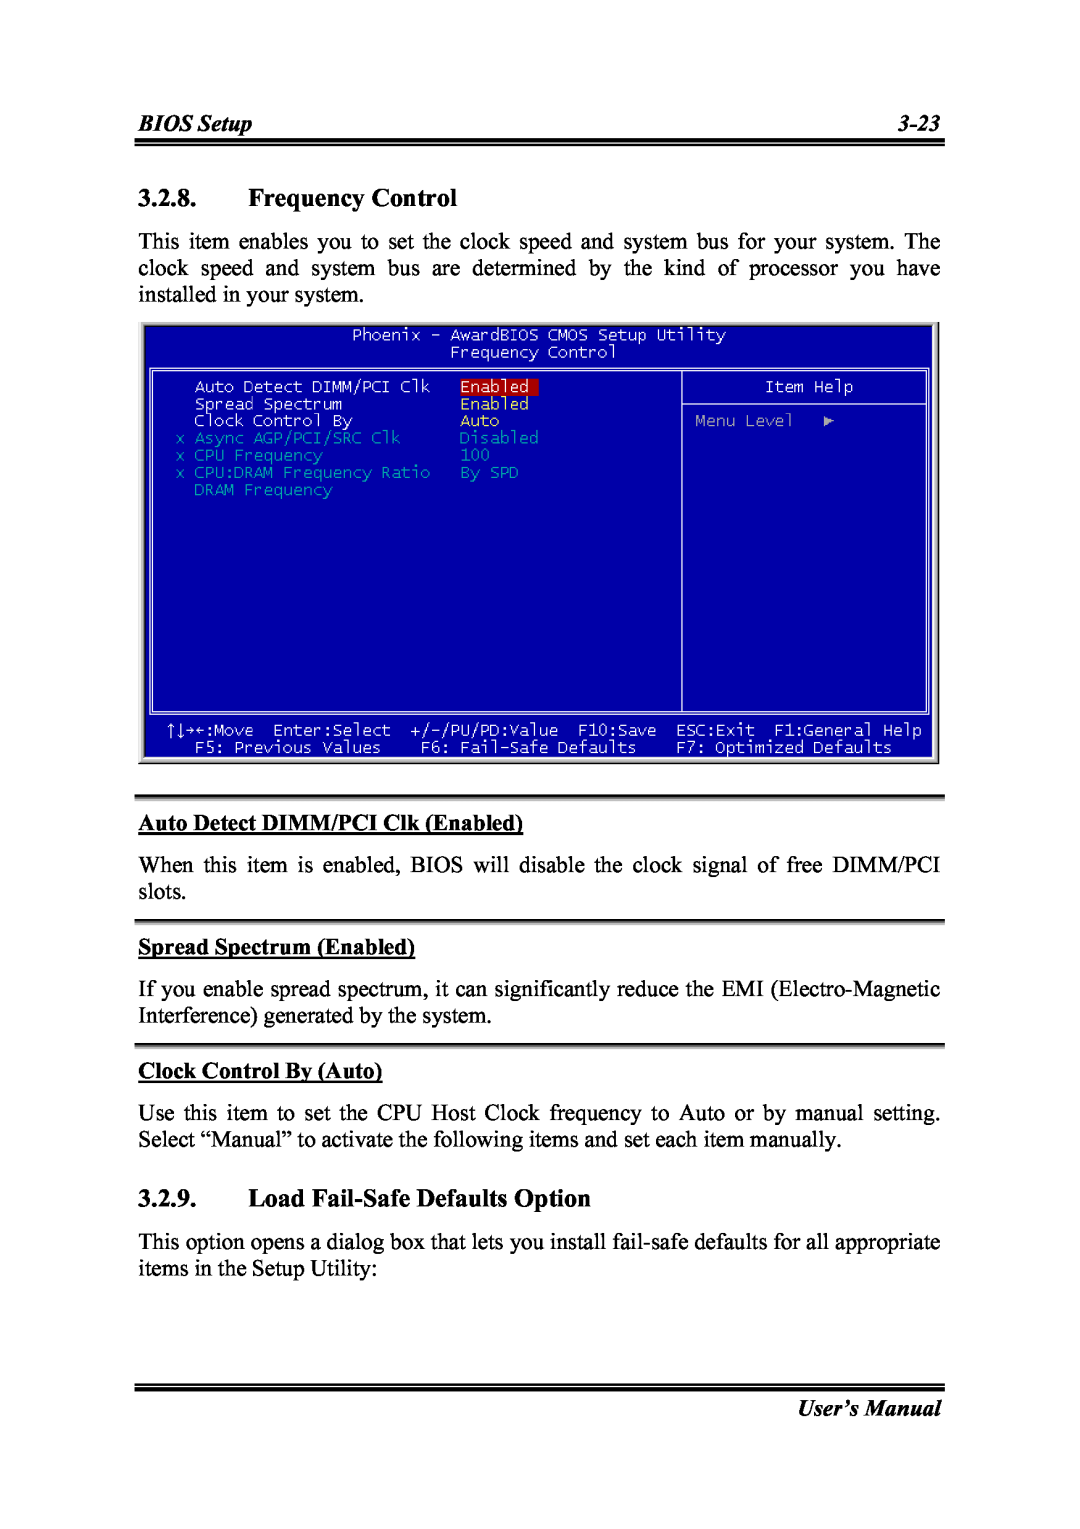 Intel SG-81, SG-80 user manual Frequency Control, Load Fail-SafeDefaults Option 